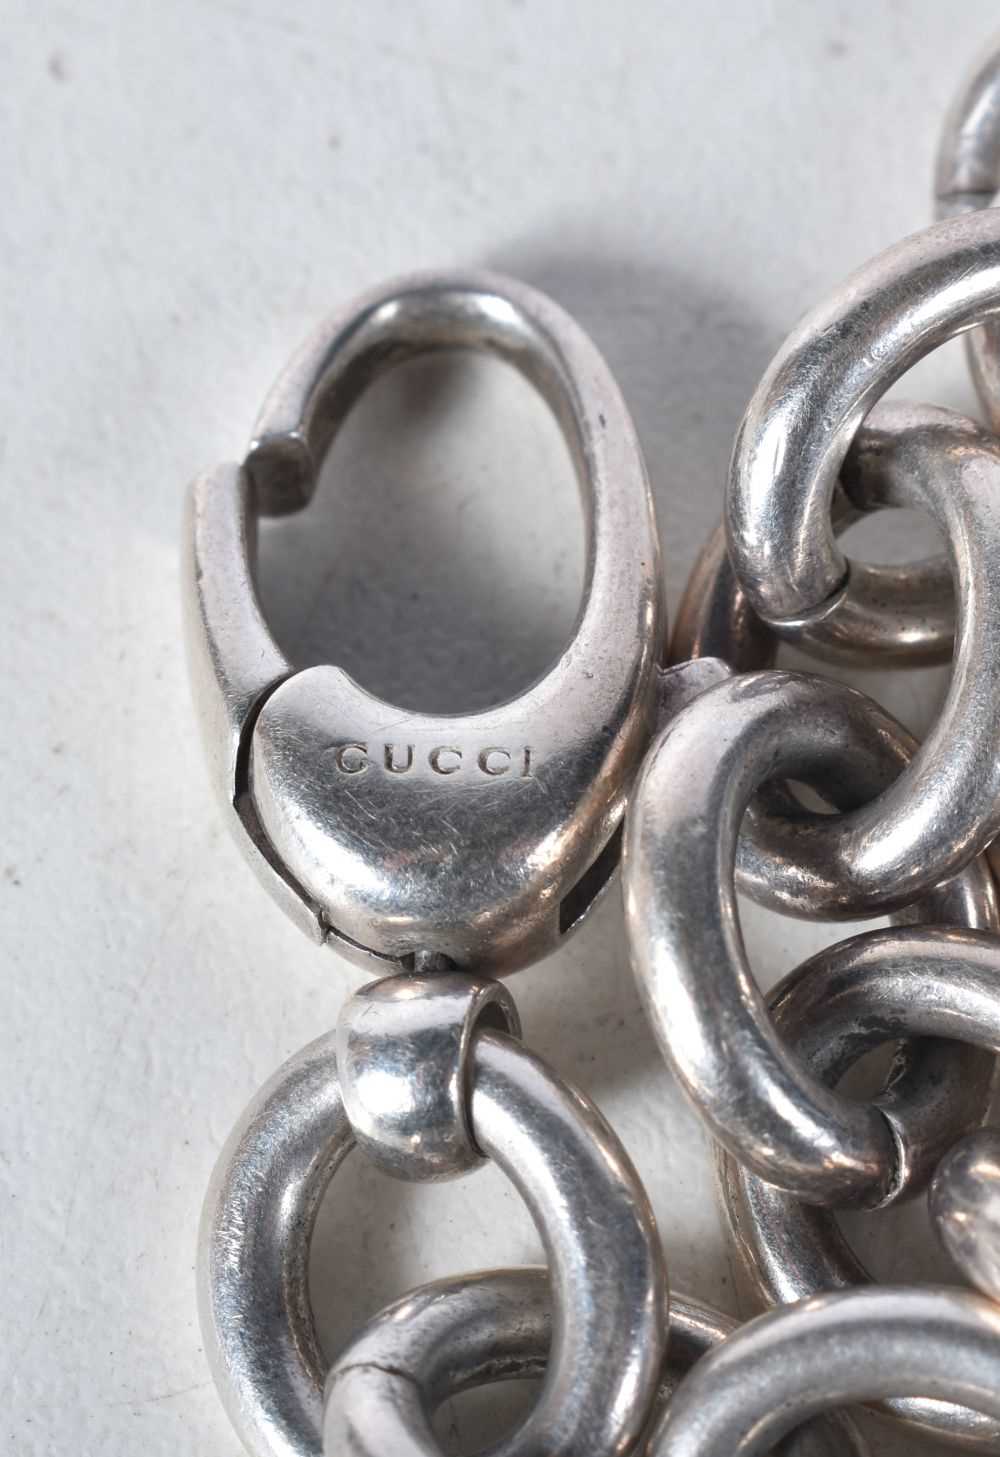 Silver bracelet with dog tags by designer Gucci. Stamped Gucci, 21cm long, weight 58g - Image 3 of 3